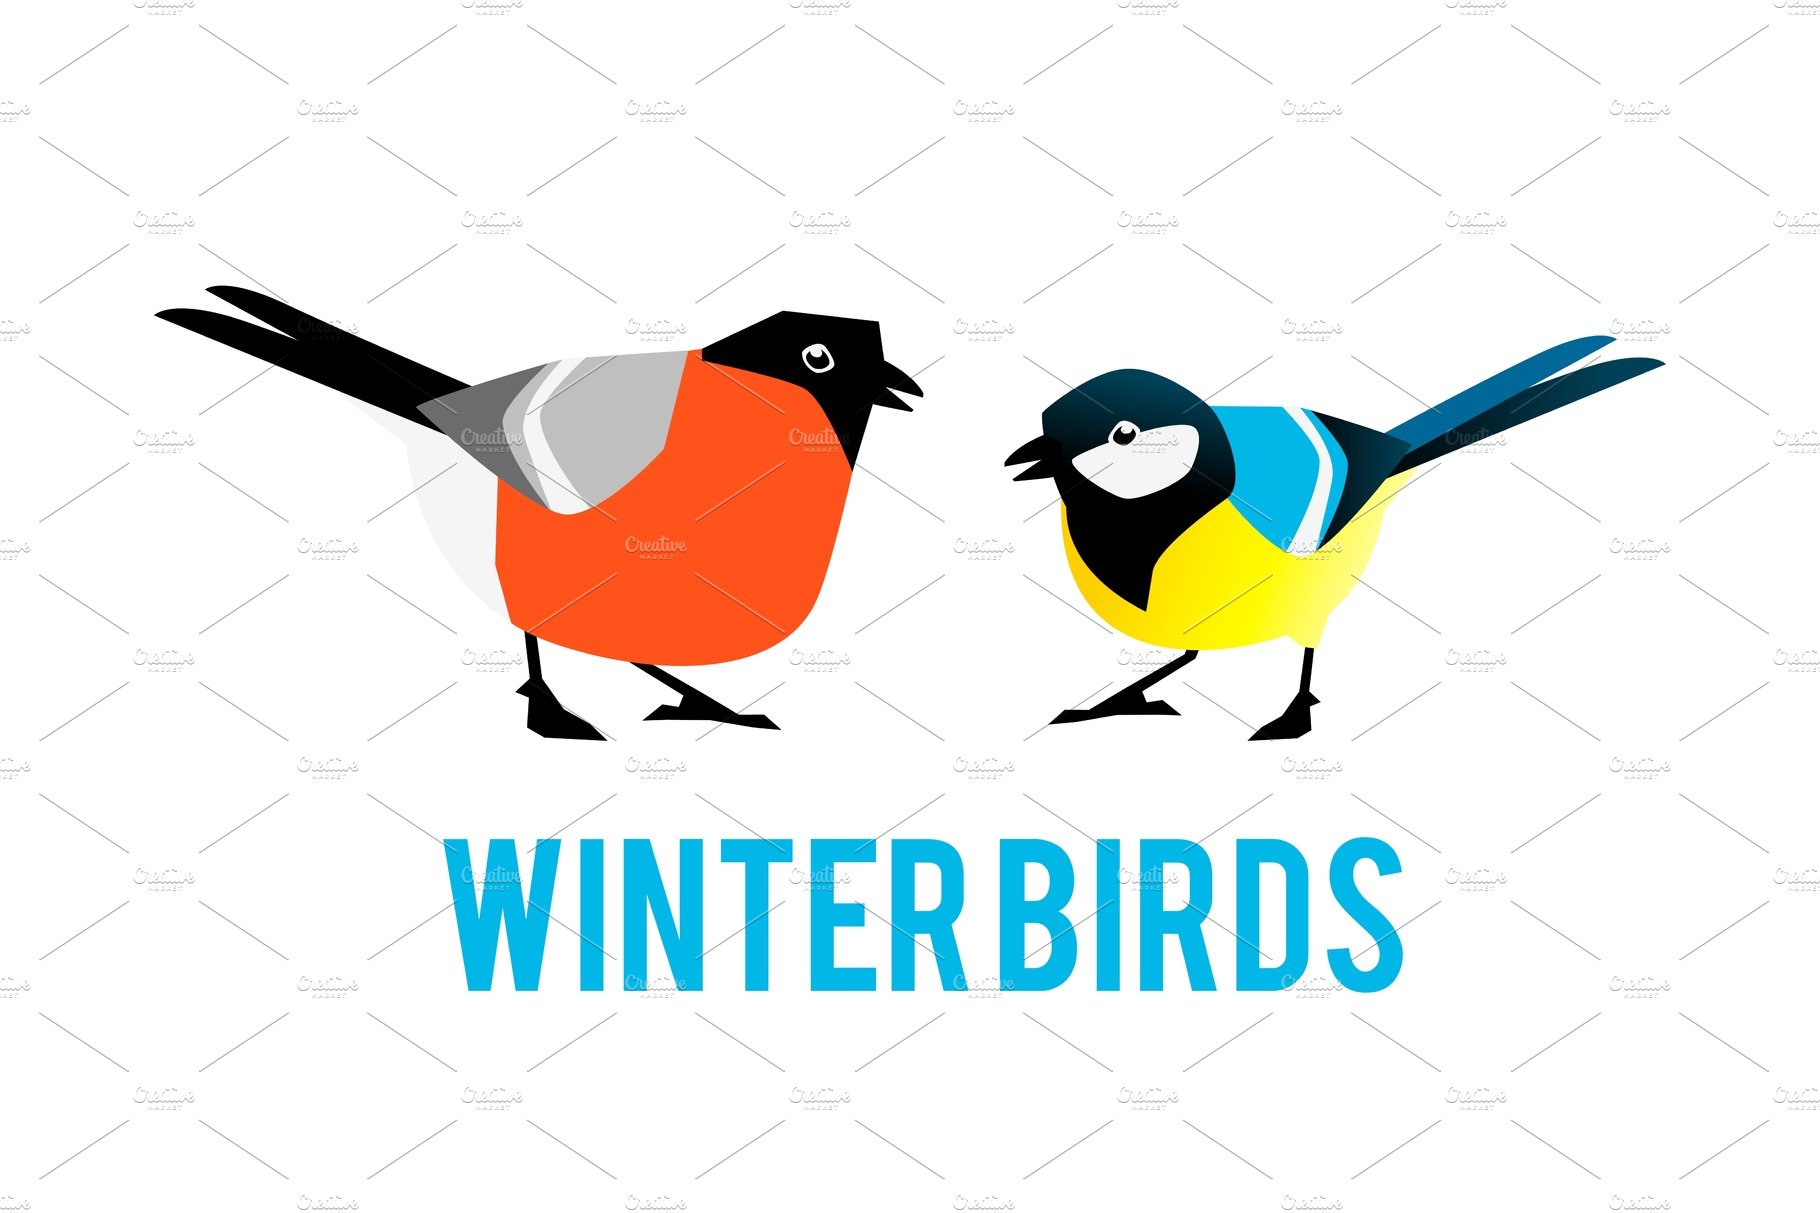 Winter birds are tit and bullfinch. cover image.